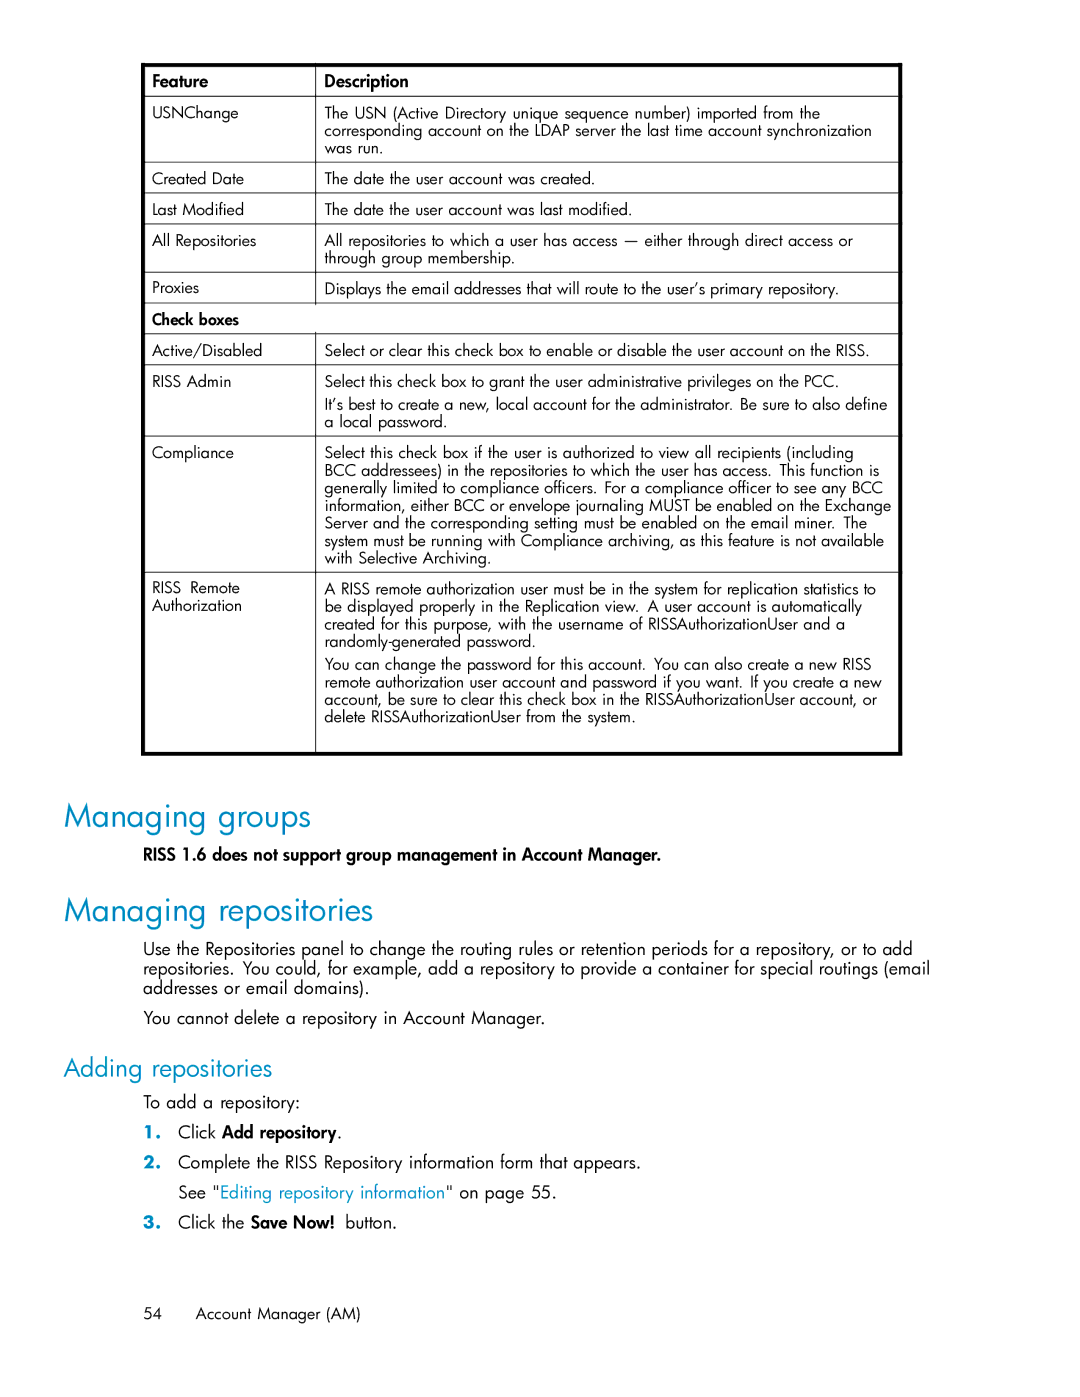 HP RISS Components manual Managing groups, Managing repositories, Adding repositories 